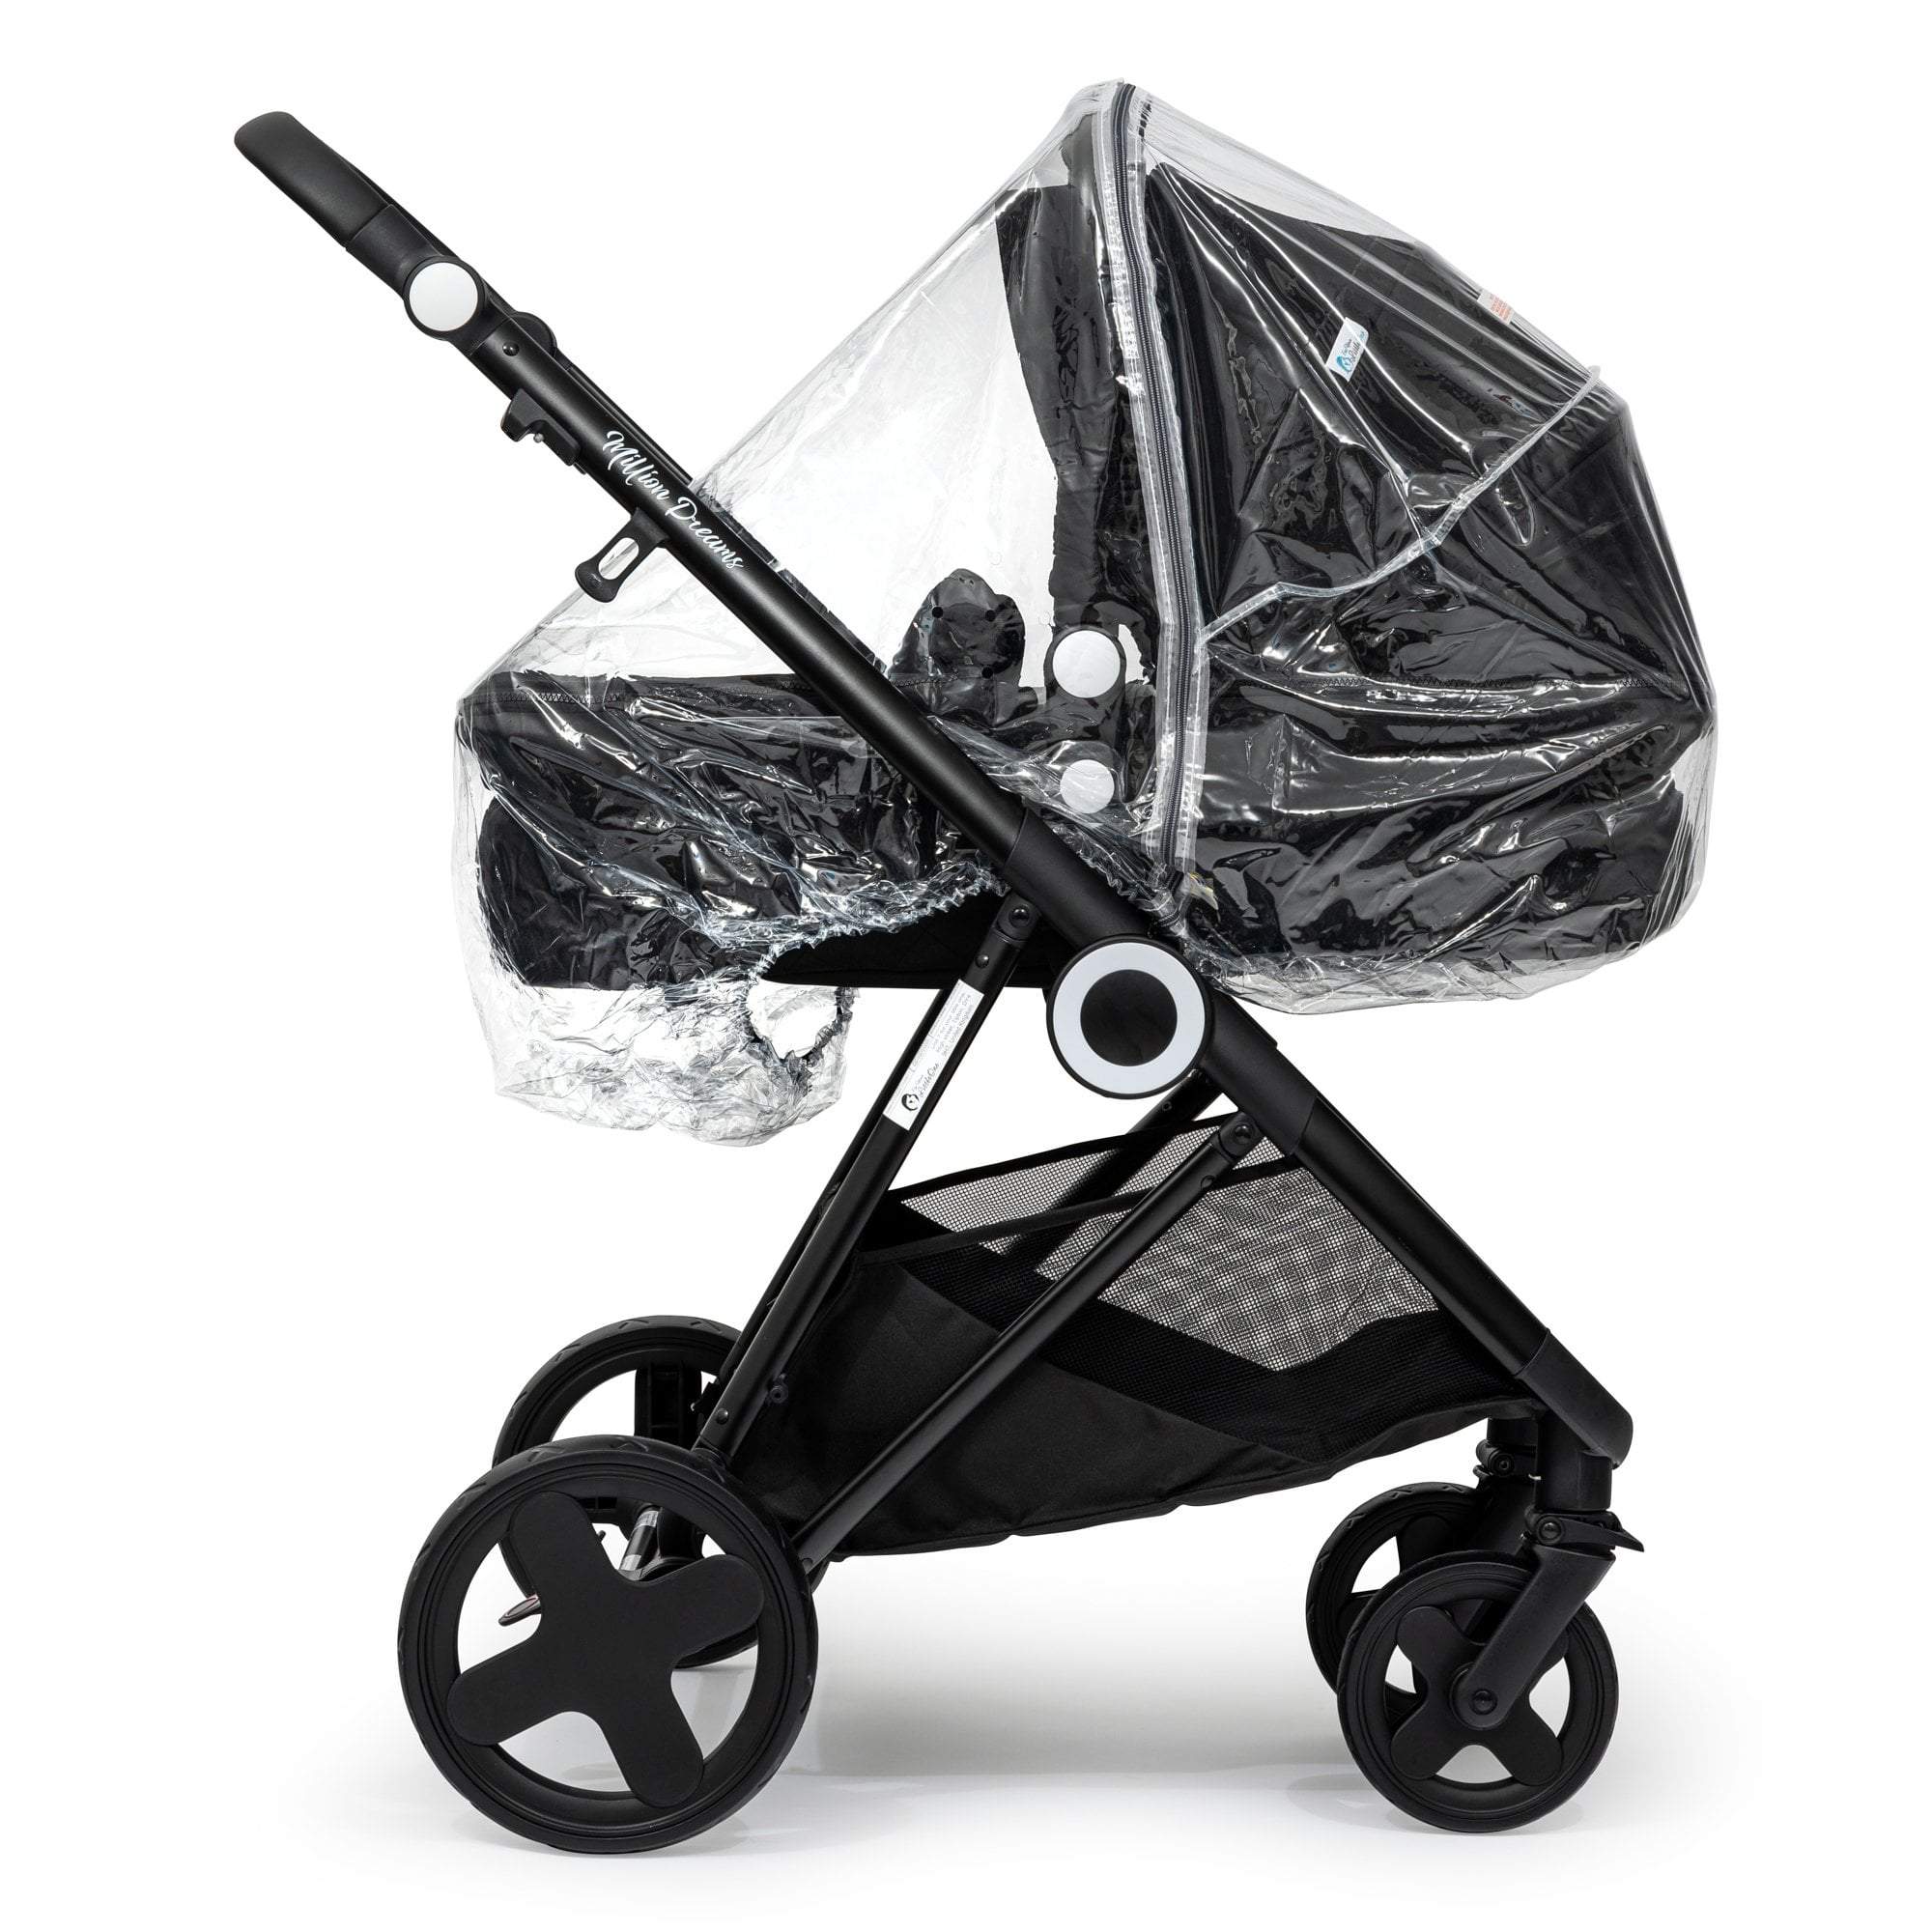 Carrycot Raincover Compatible With Kiddicare - Fits All Models - For Your Little One